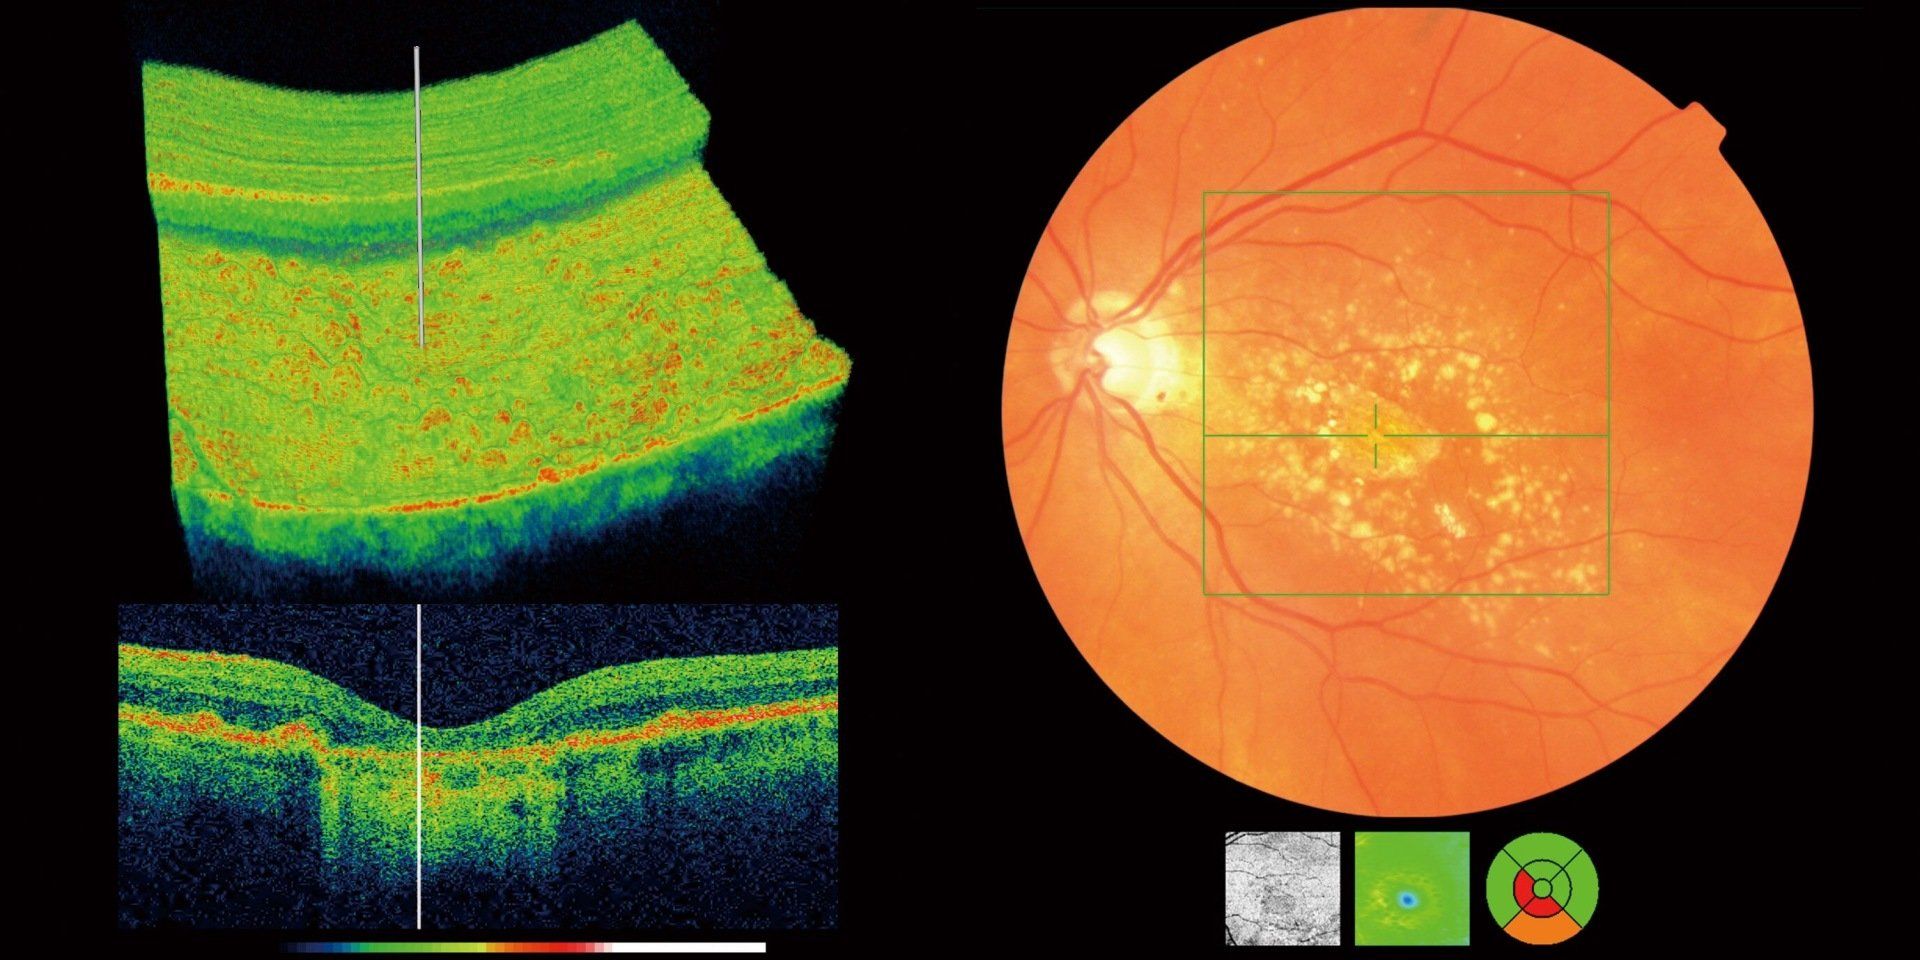 OCT images taken from a 3D OCT. Showing the layers of the retina